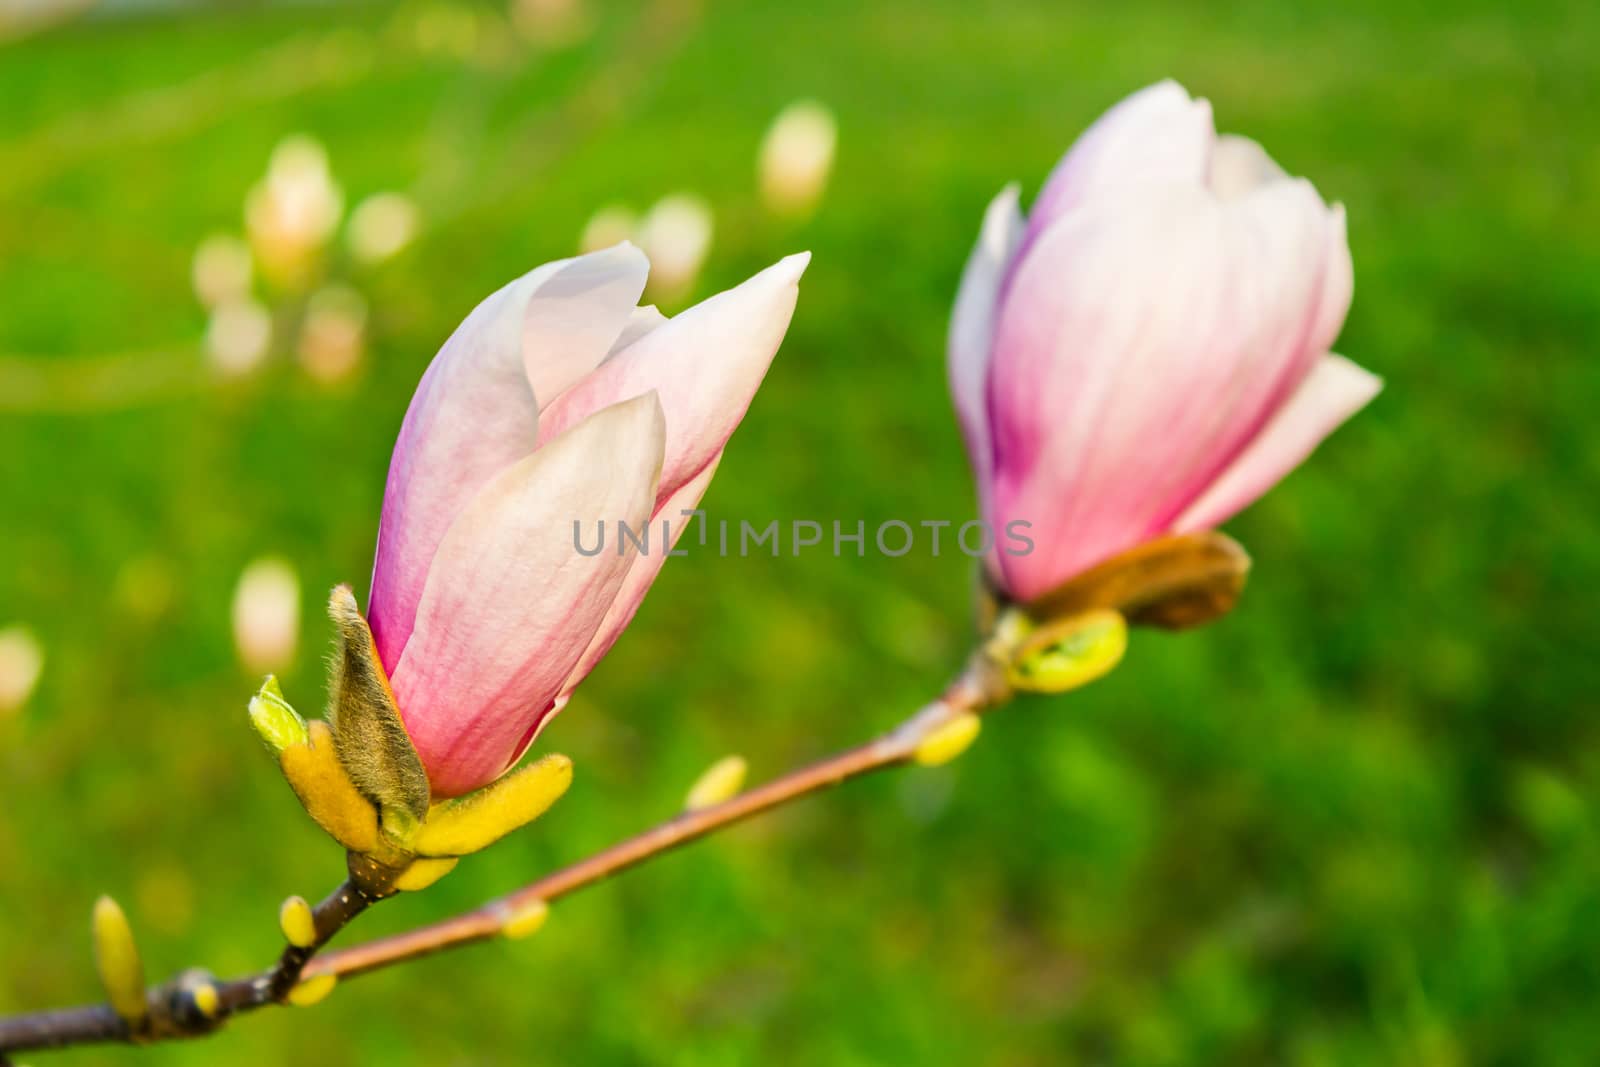 two magnolia flowers close up on a green grass background